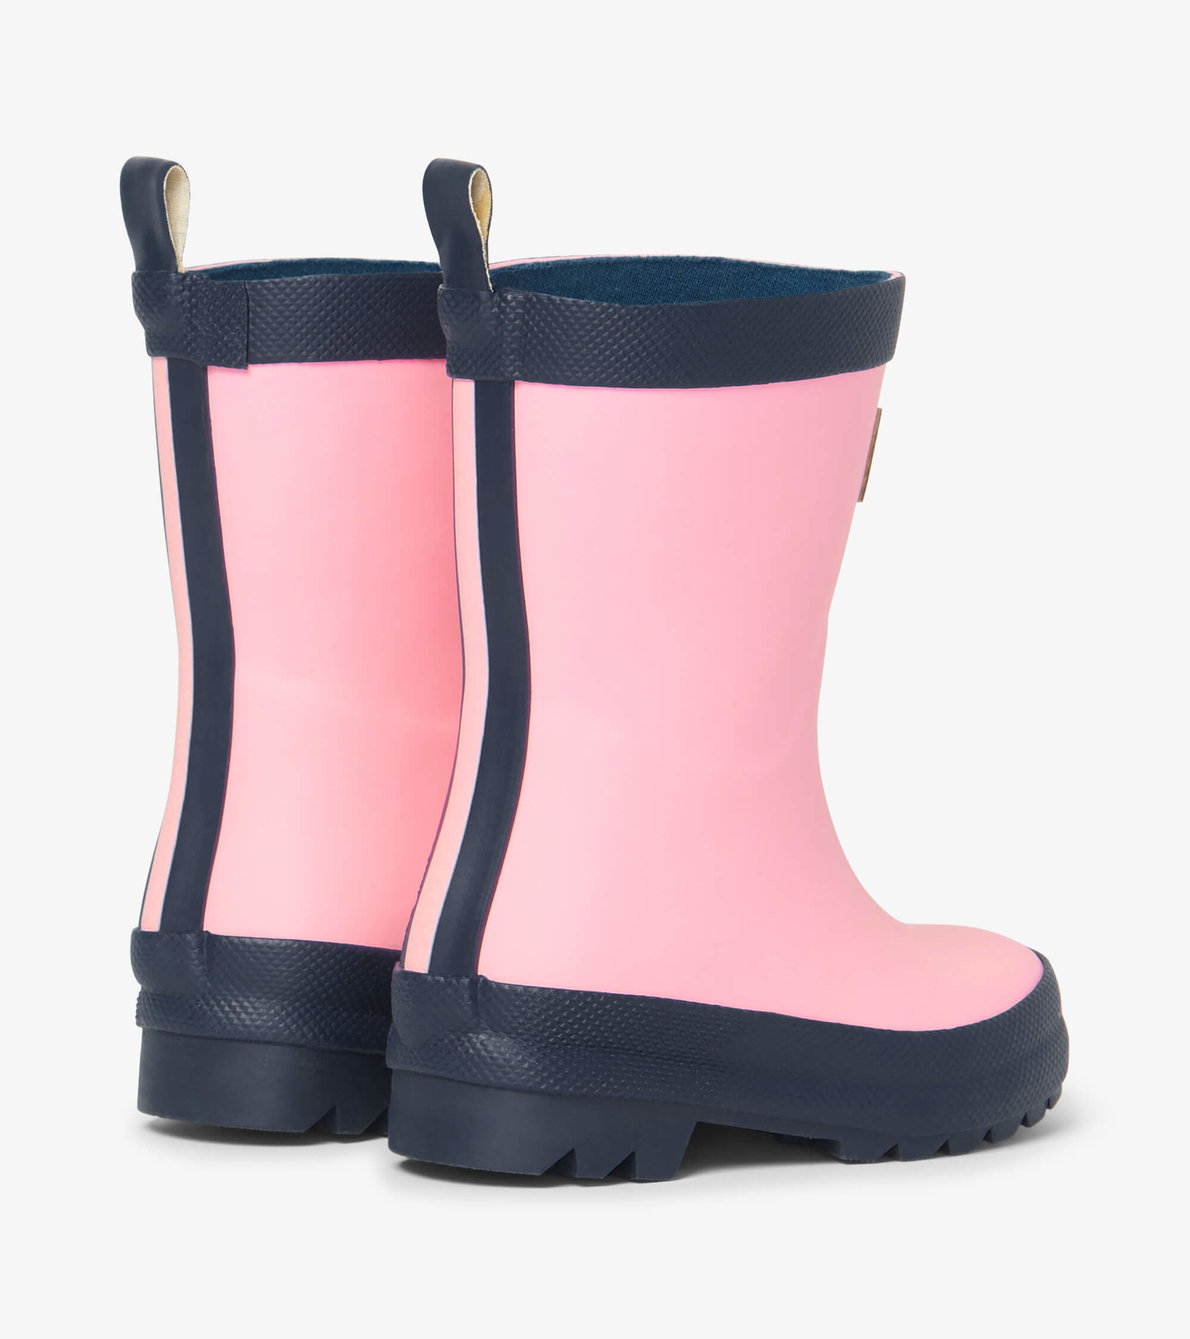 View larger image of My 1st Rain Boots - Pink & Navy